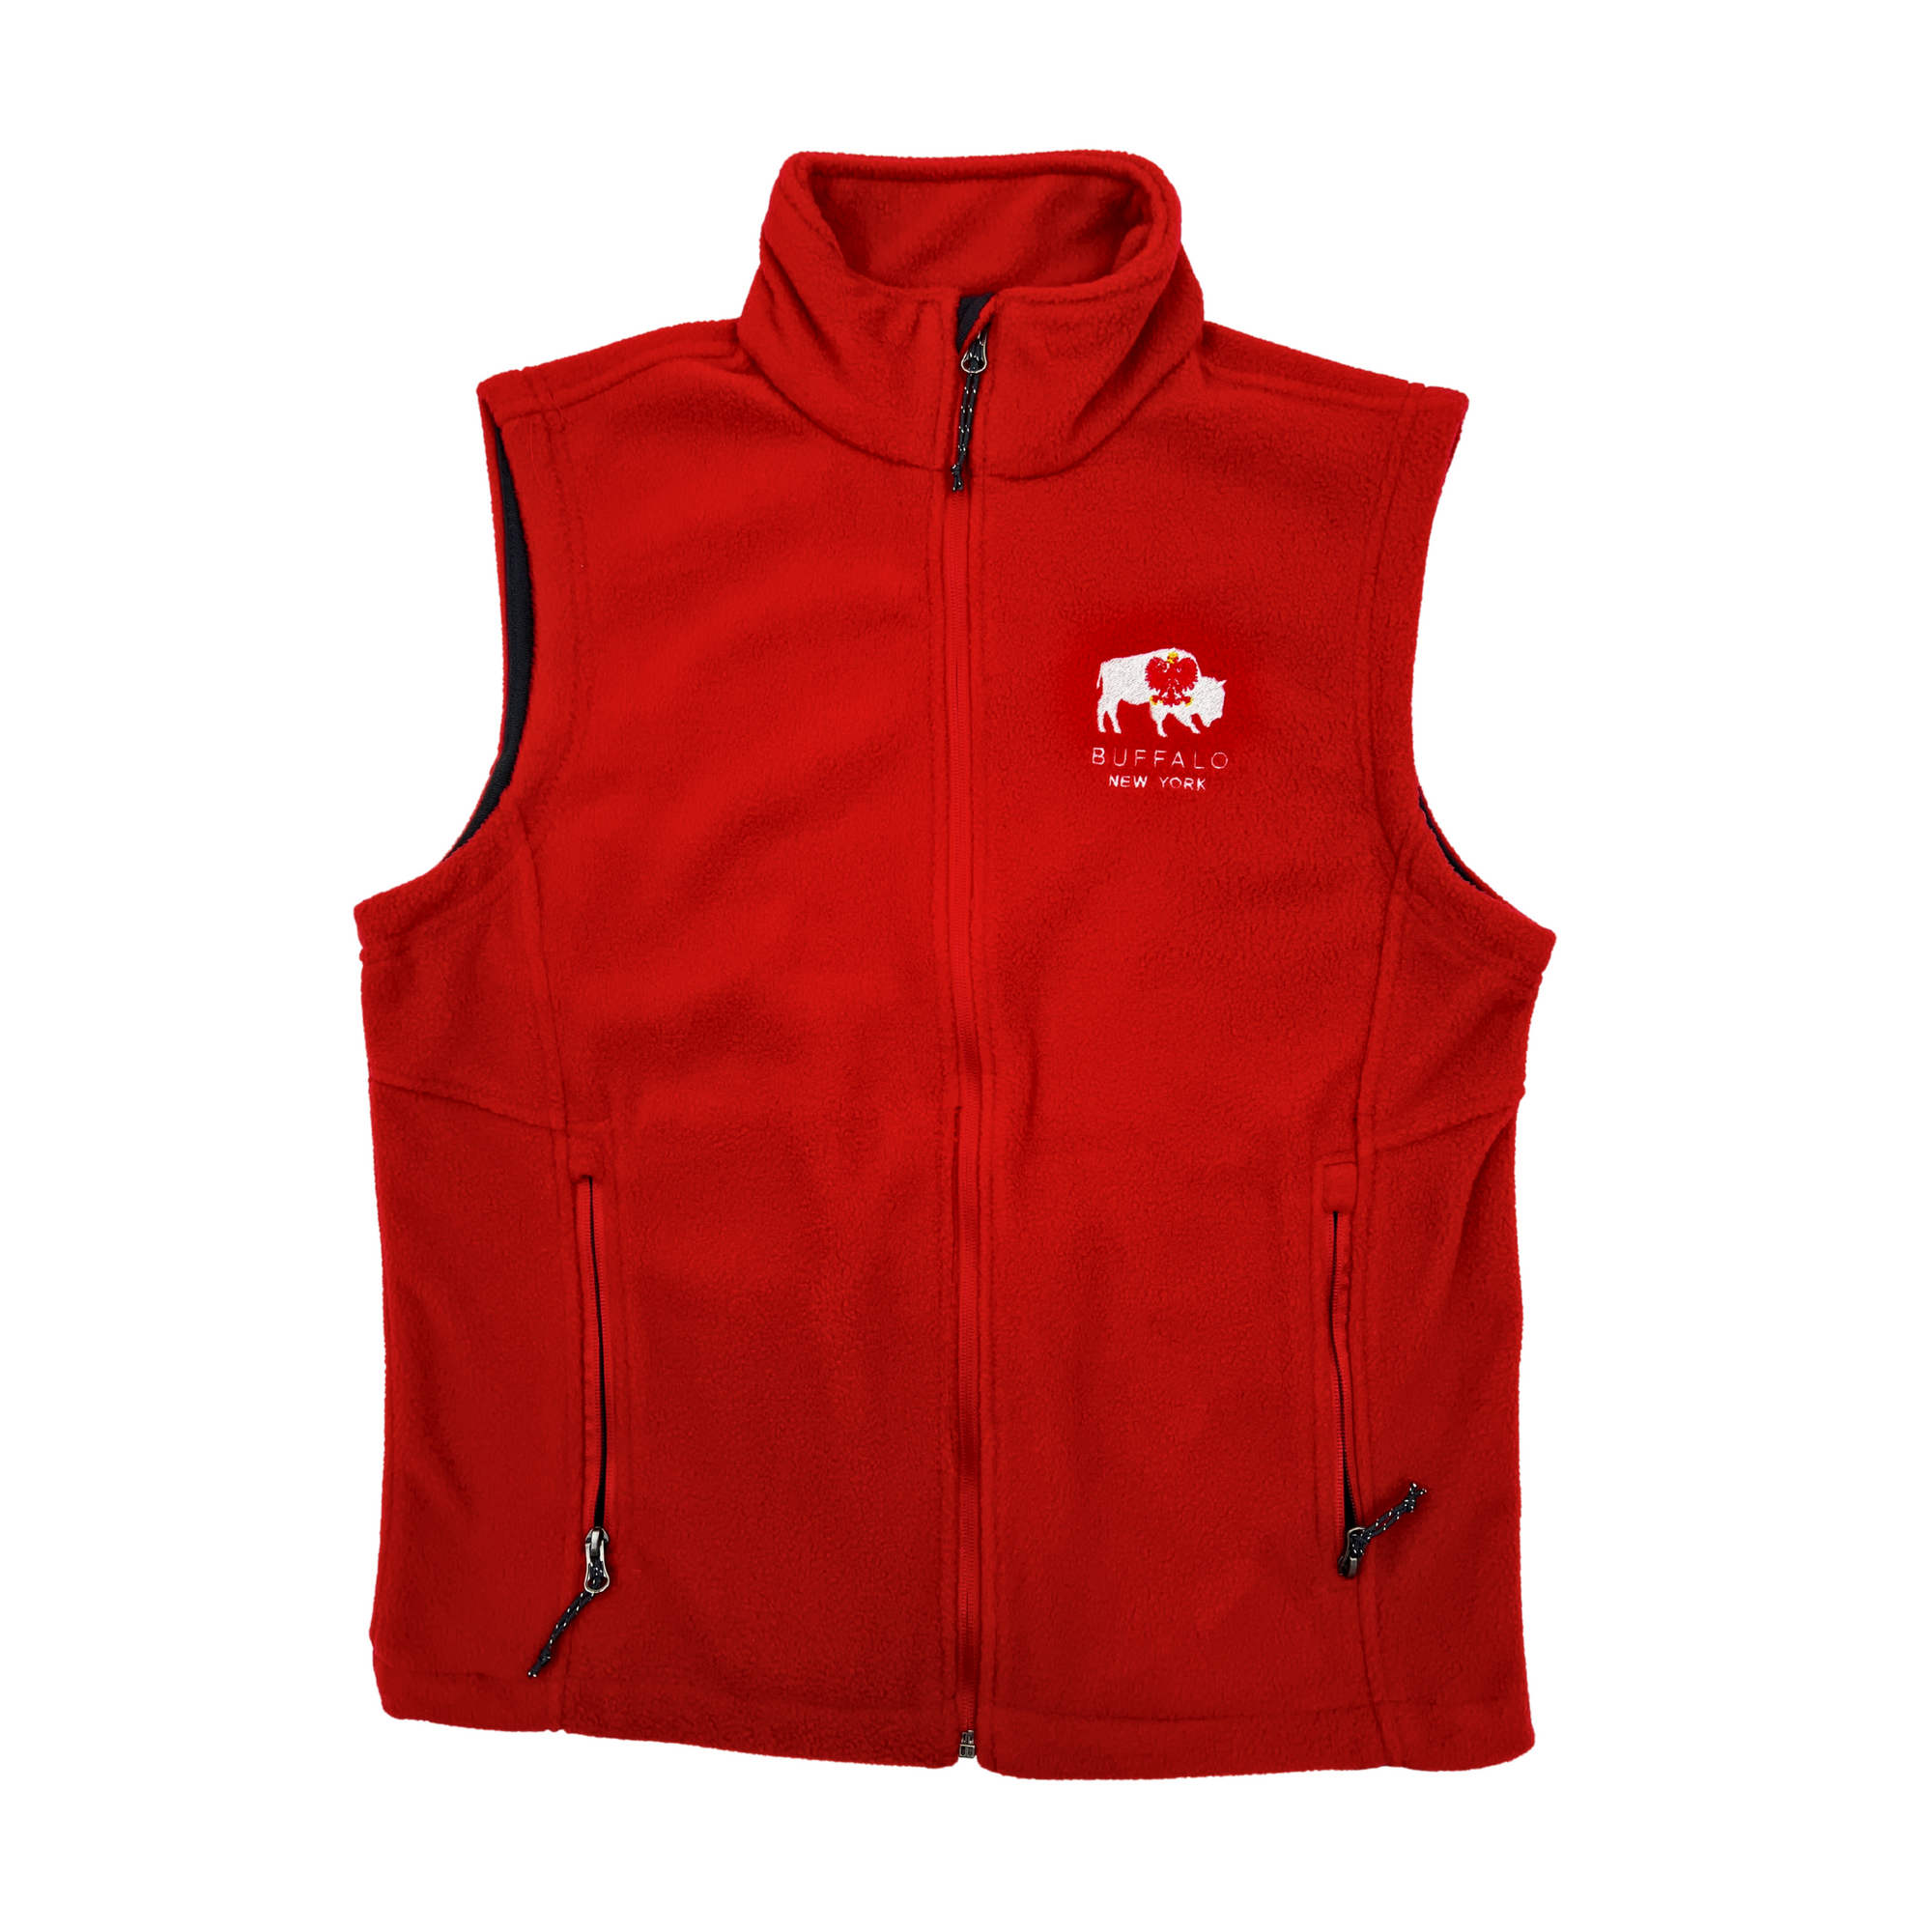 red fleece vest with white embroidered buffalo and white eagle polish symbol in left chest corner